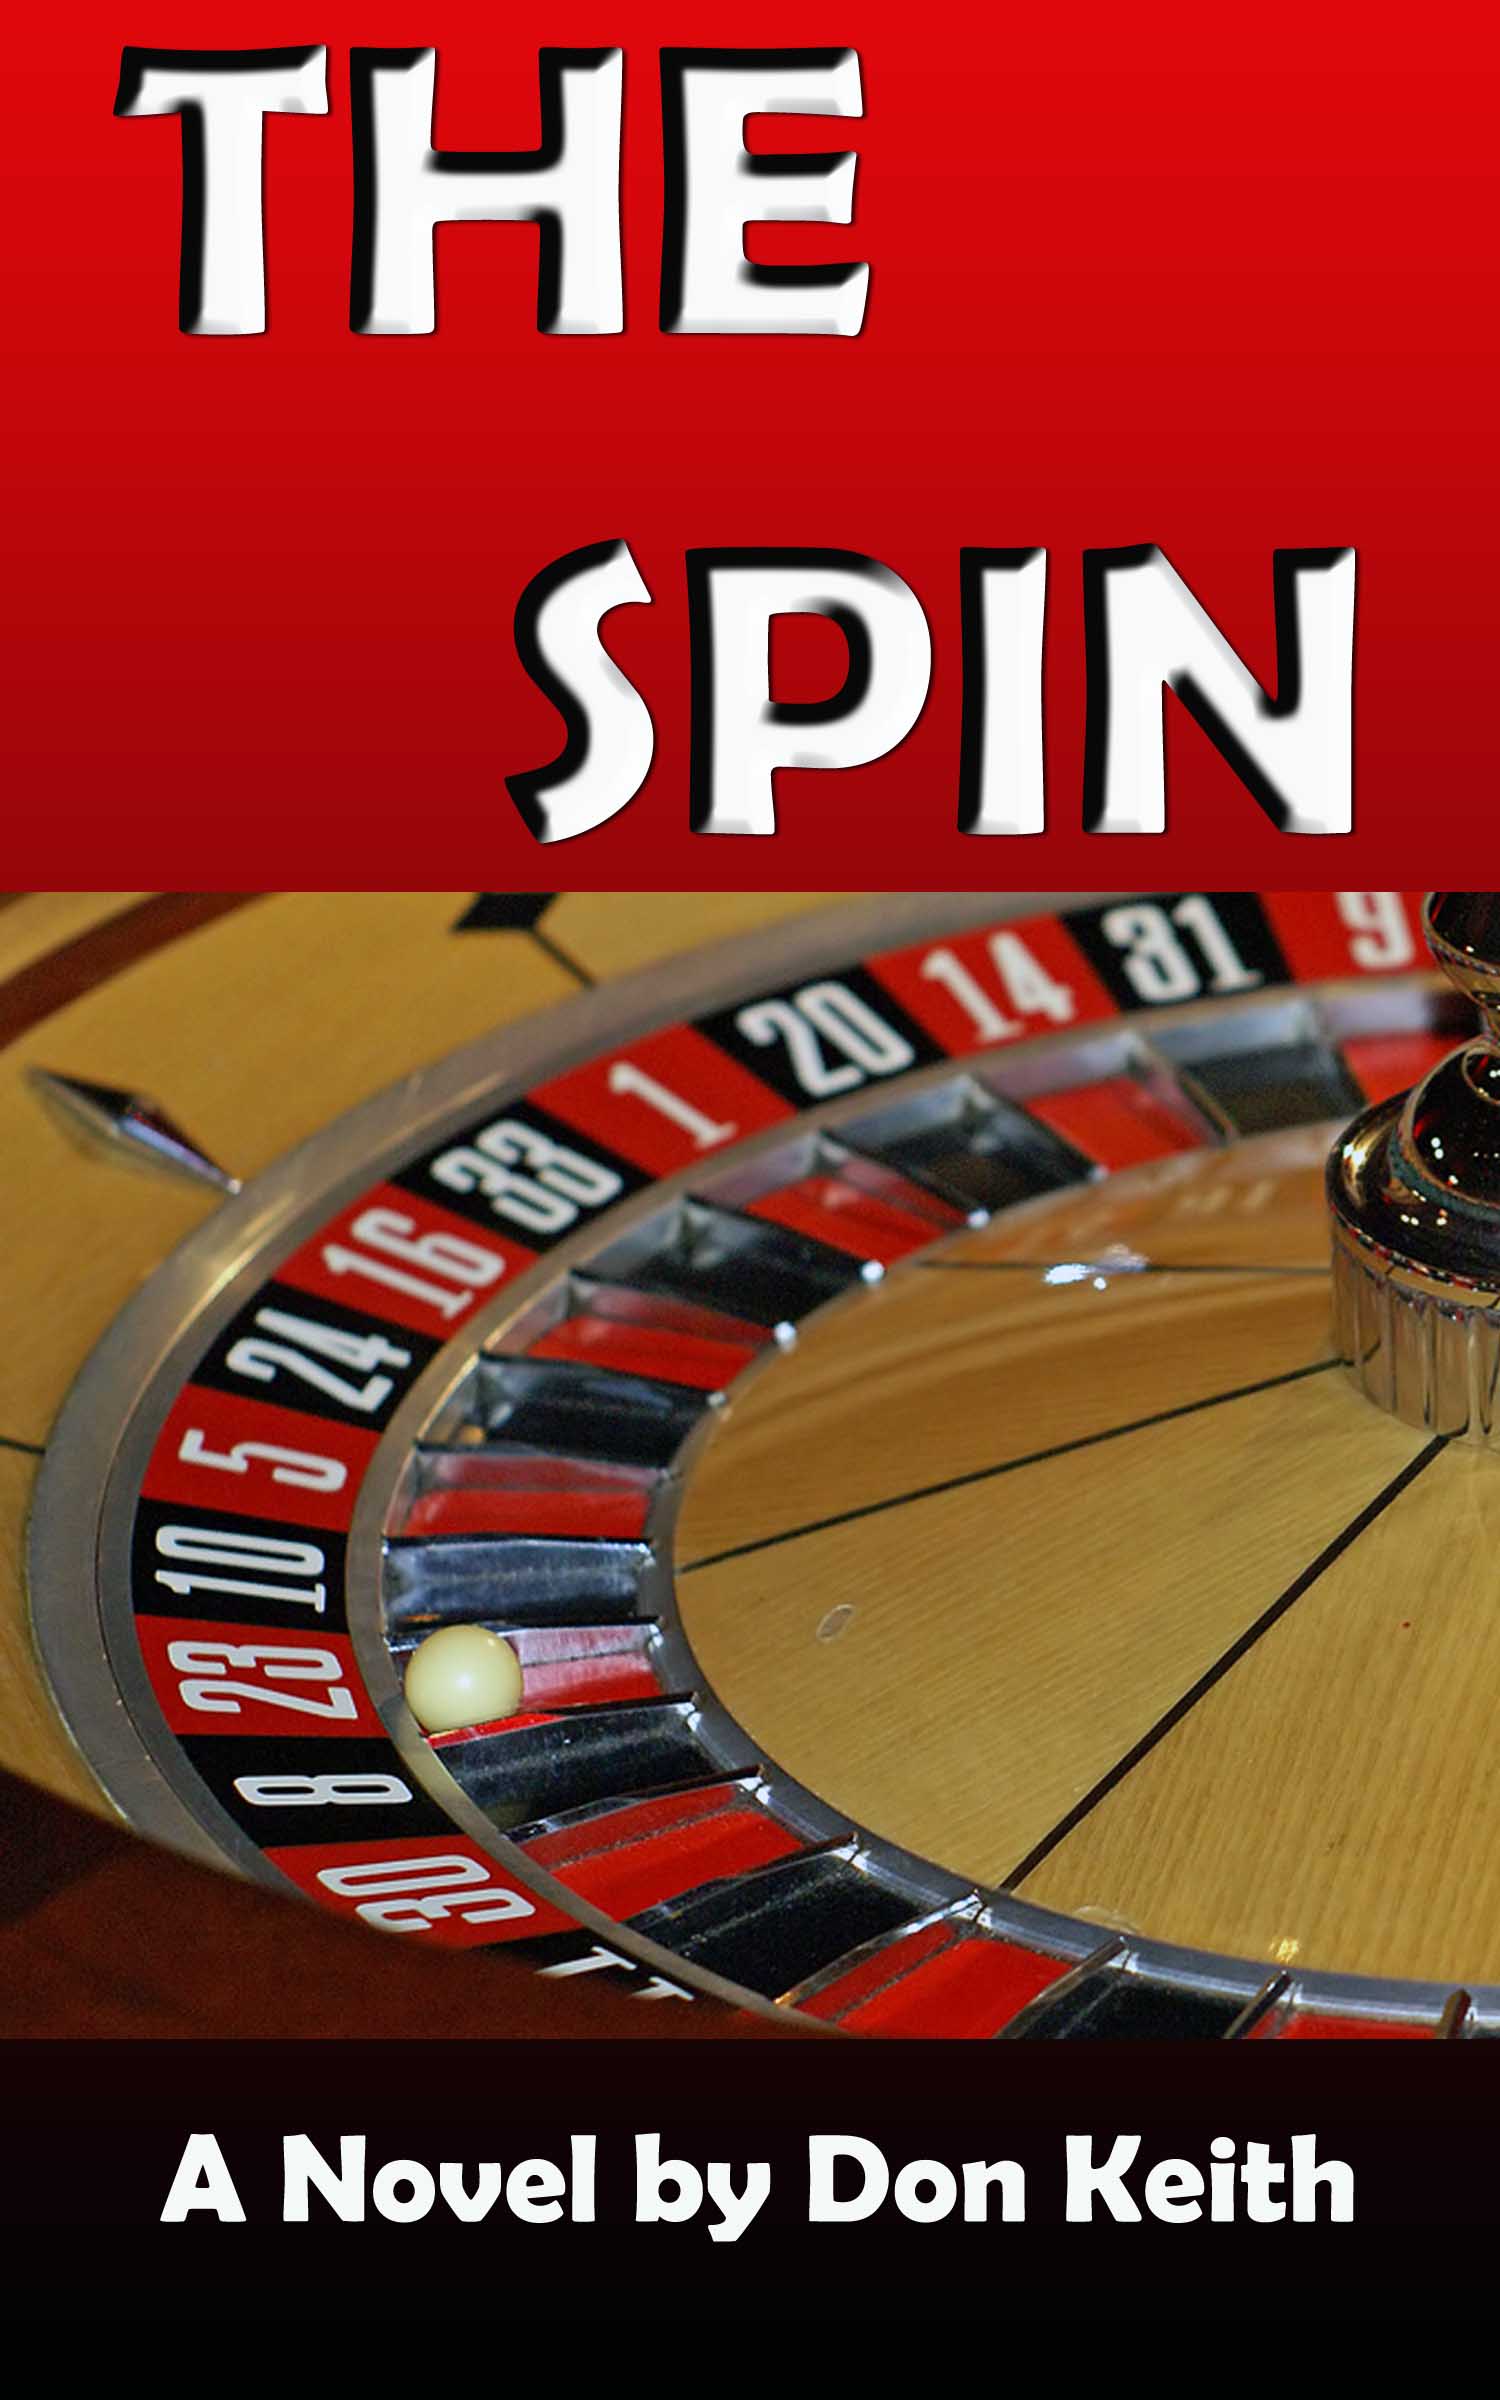 THE SPIN, a new novel by author Don Keith